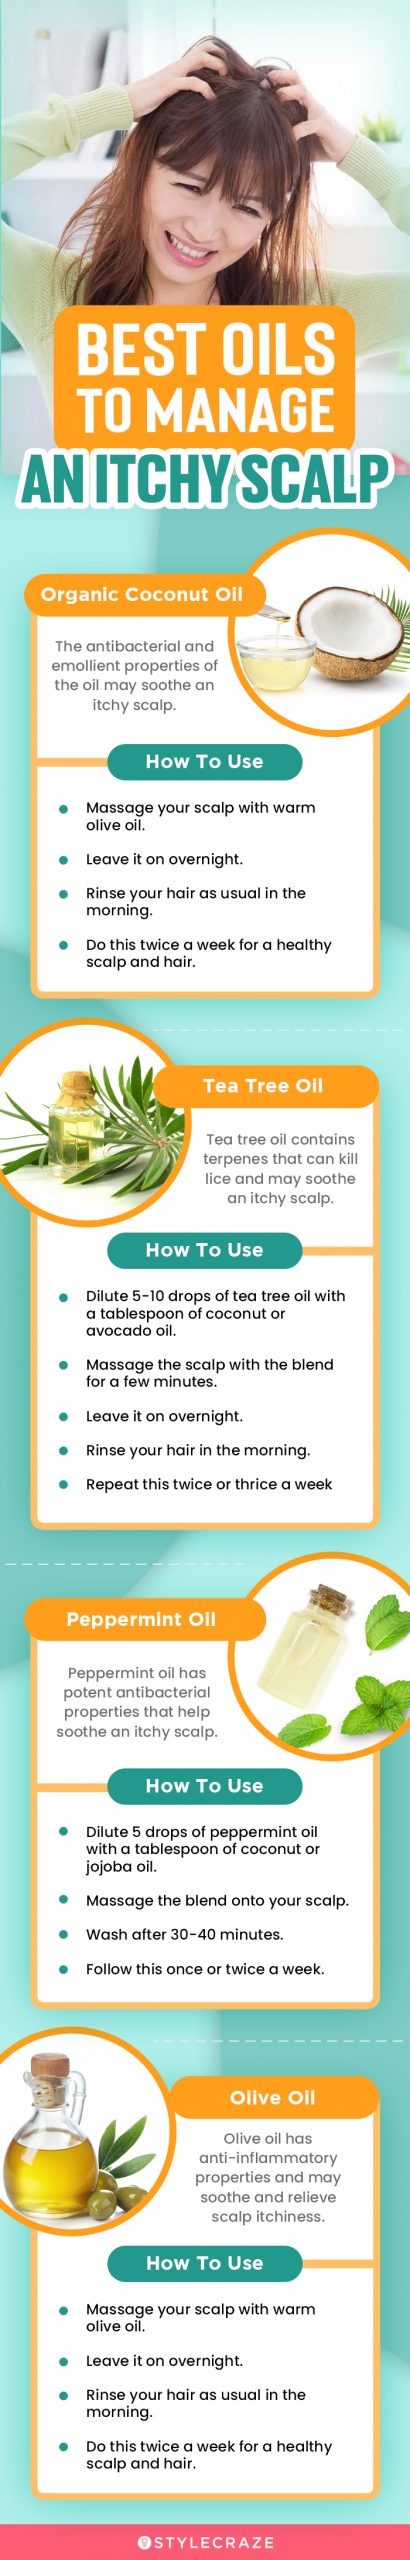 best oils to manage an itchy scalp (infographic)